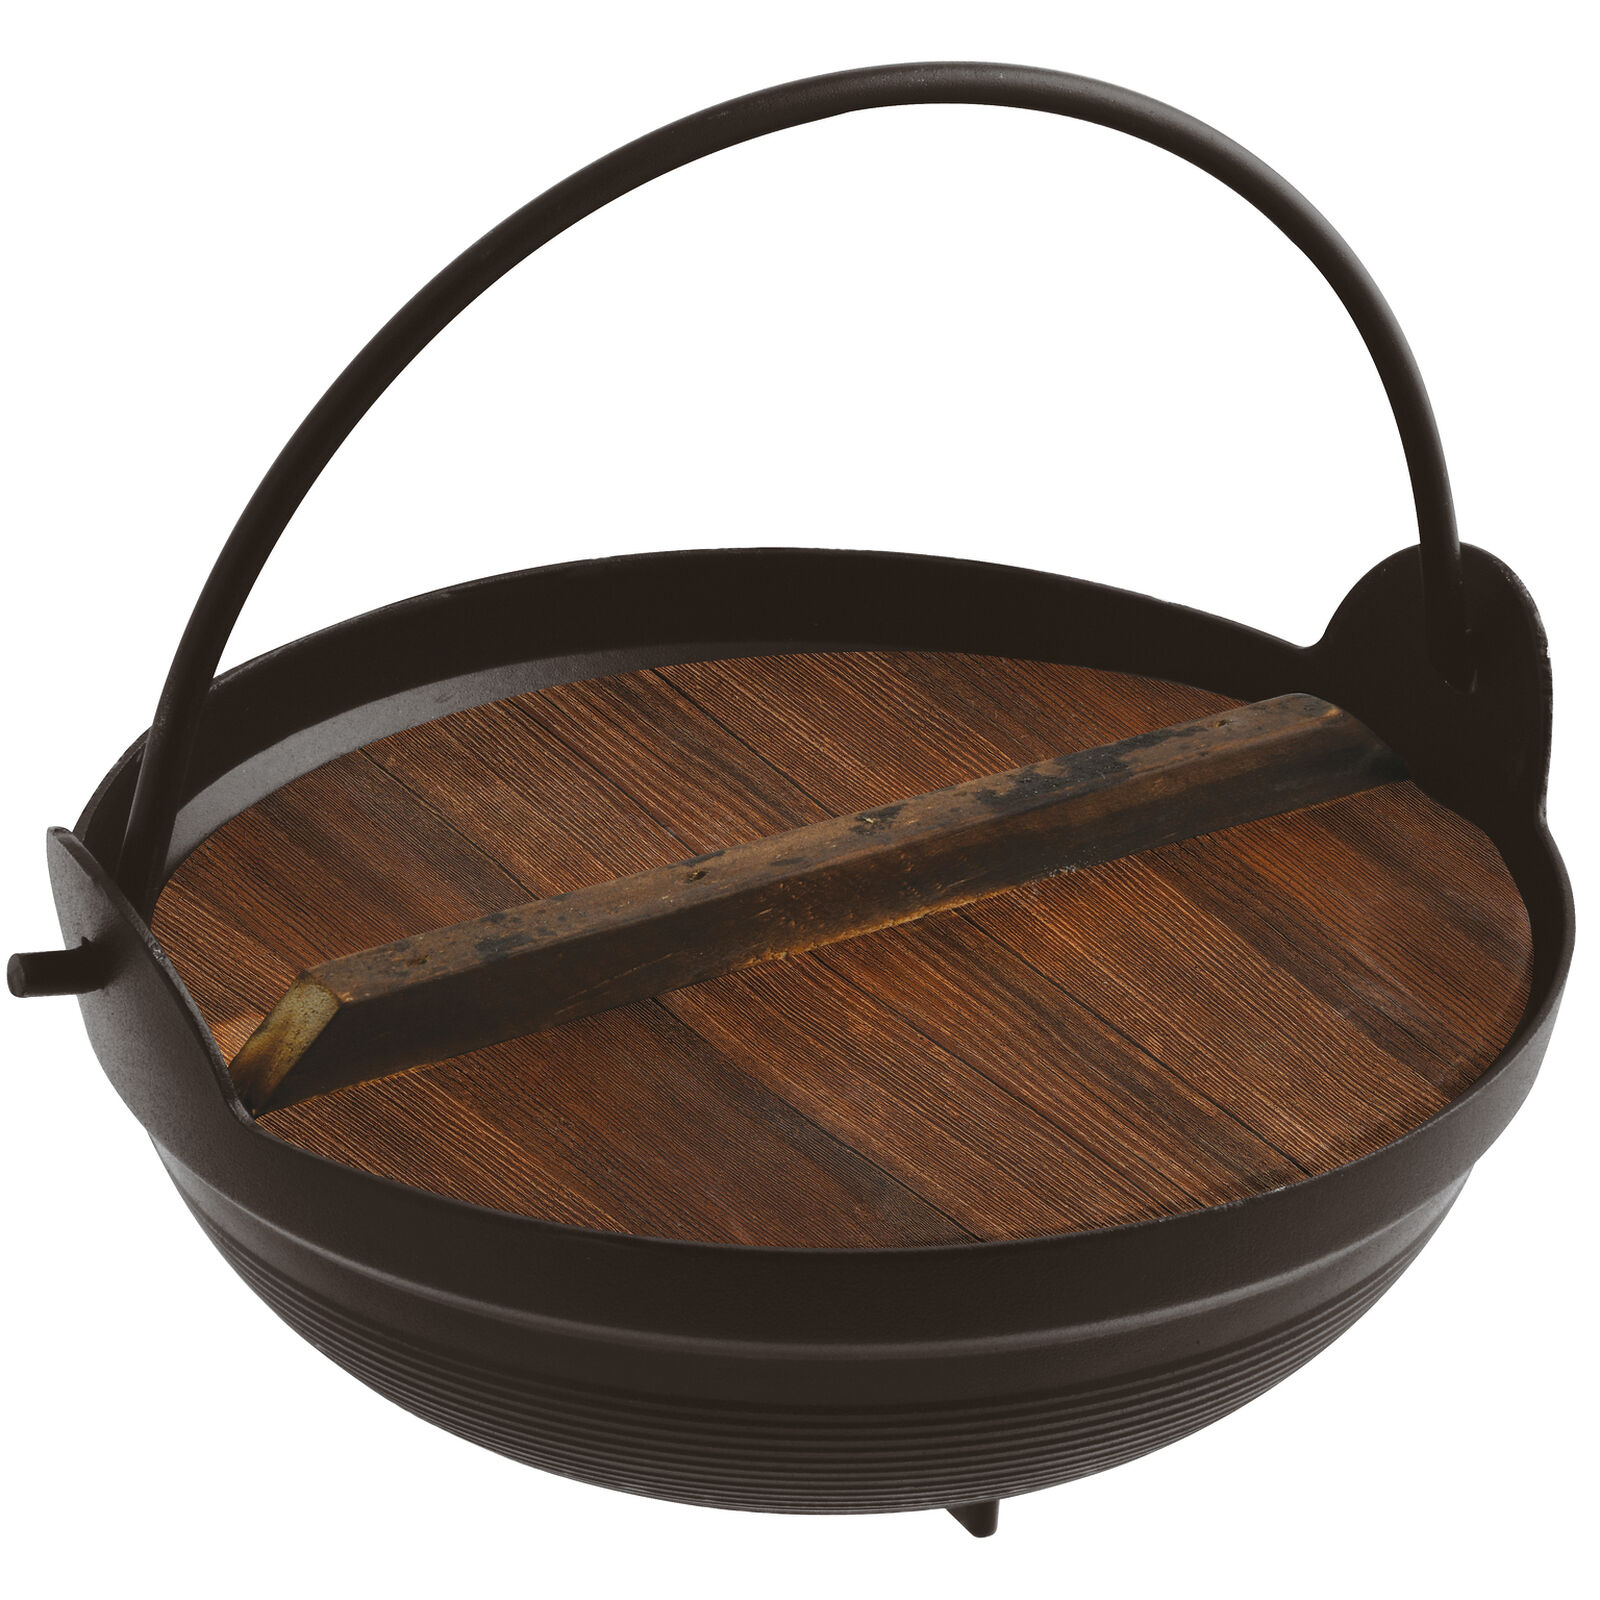 Hot pot with wooden stand, Paderno